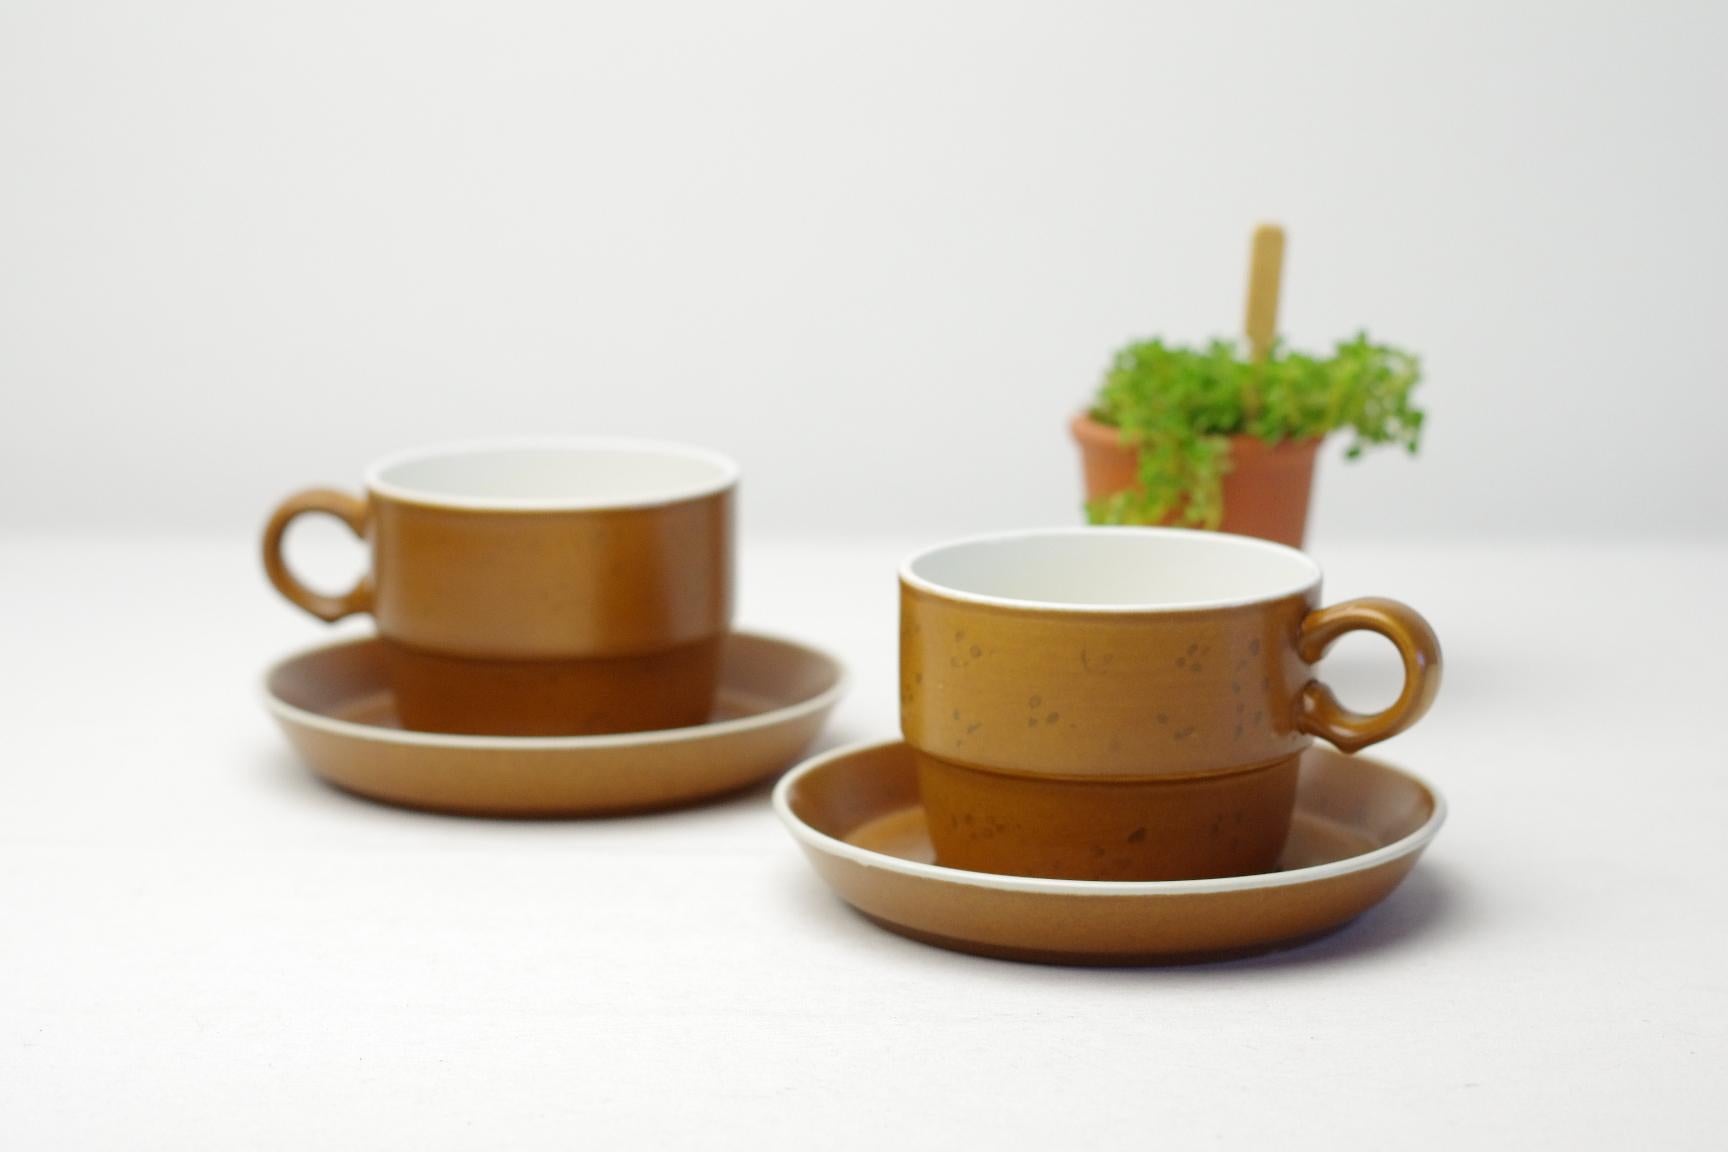 Product Description:
The coq-series by Stig Lindberg is very appealing to the eye. The light-brown color will make it look good on almost any table. Interesting is that the black details on the cups and saucers are handpainted giving each item